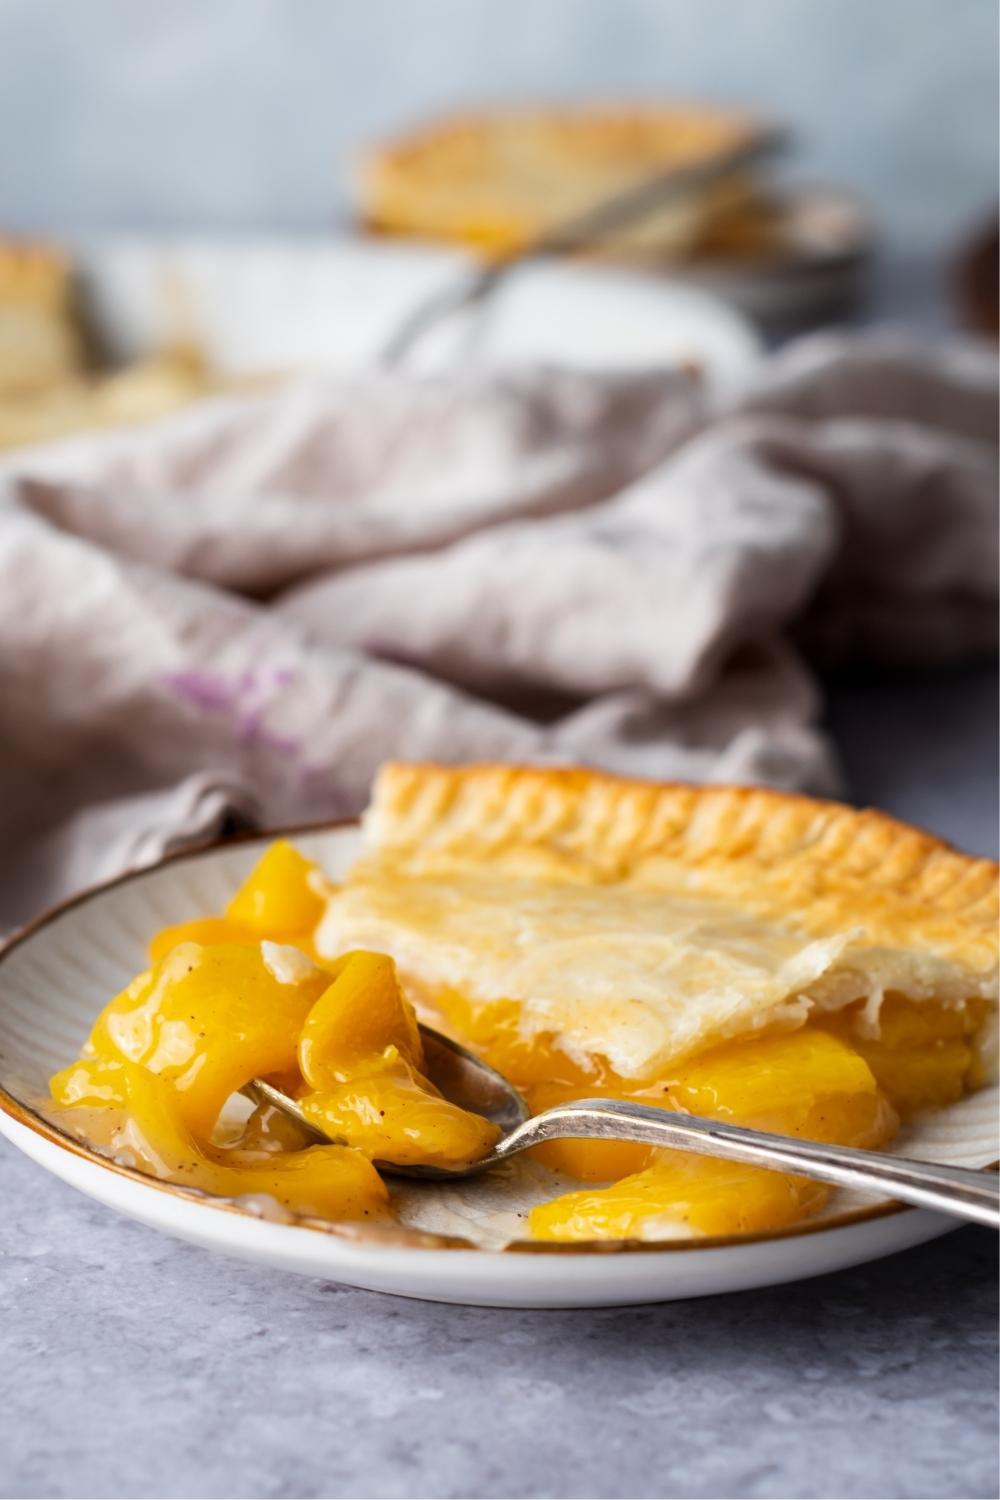 A serving plate with one slice of peach pie that is half eaten. A spoon sets with peach pie filling on it.